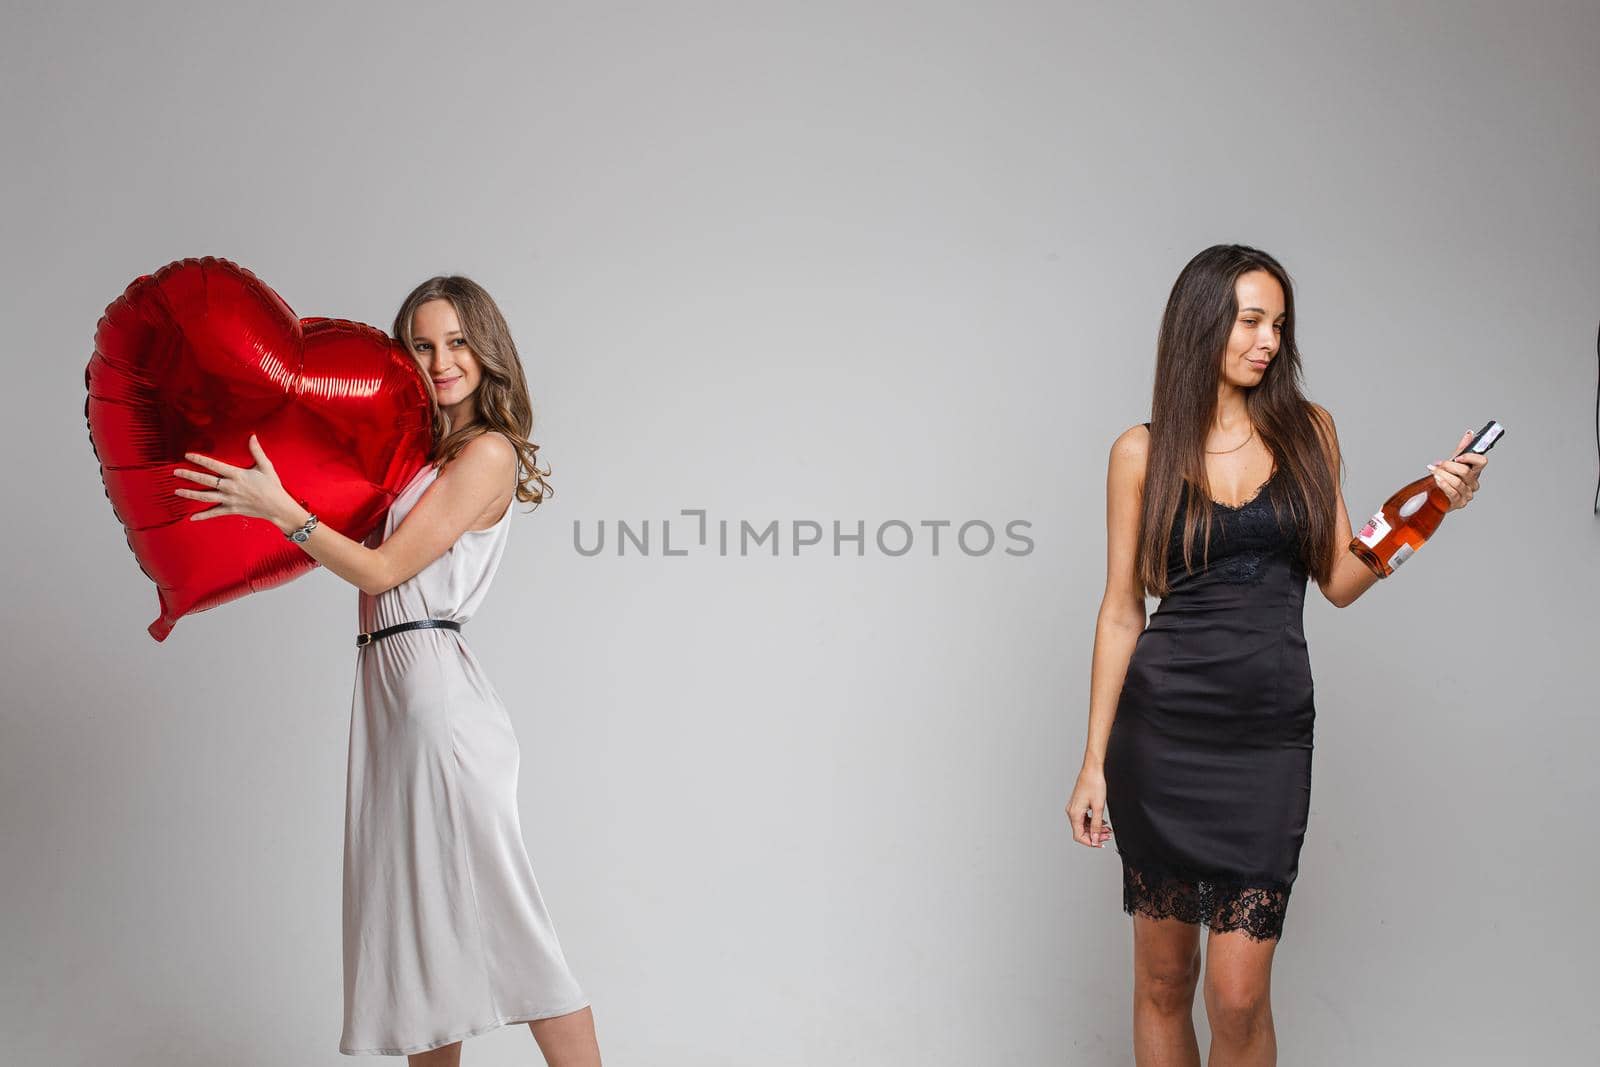 Studio portrait of two friends in silver and black dresses posing on Valentine s day. Fair-haired girl in white dress embracing heart-shaped balloon while brunette in black holding bottle of wine.